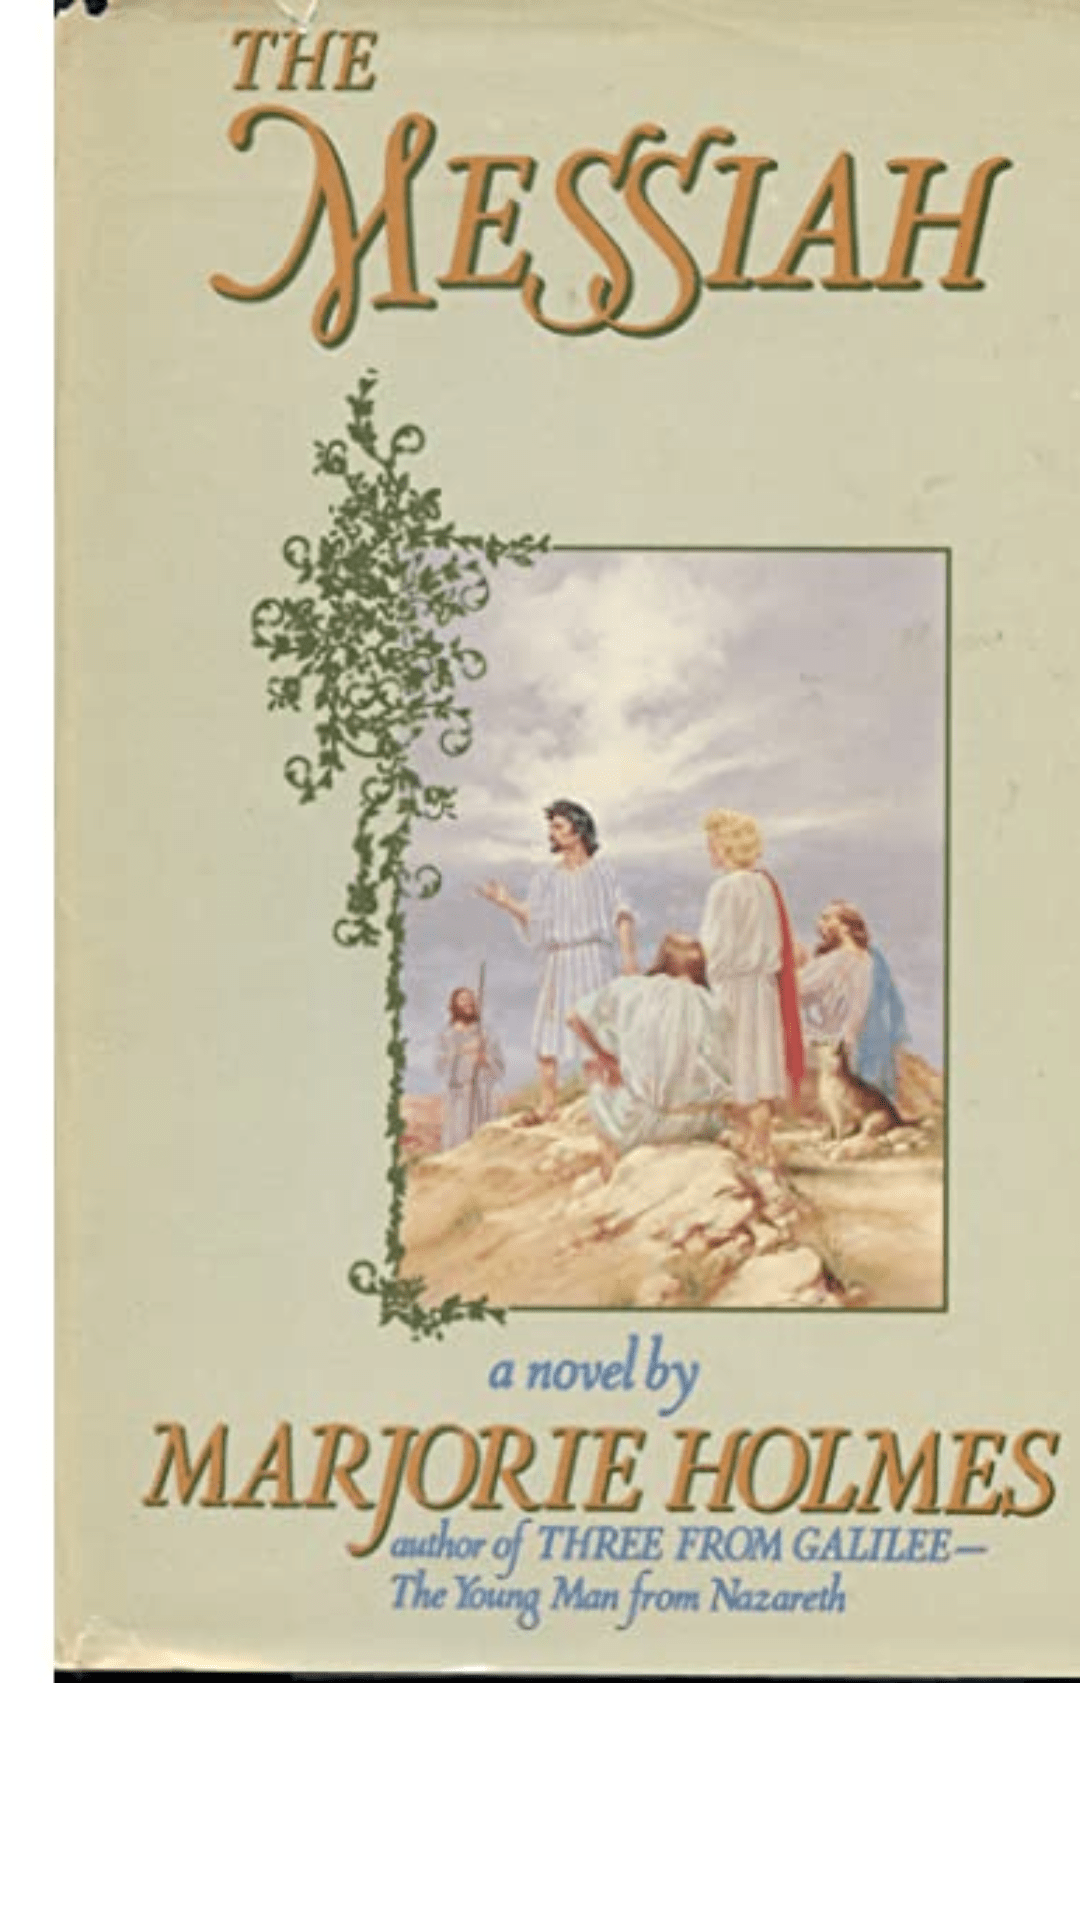 The Messiah by Marjorie Holmes